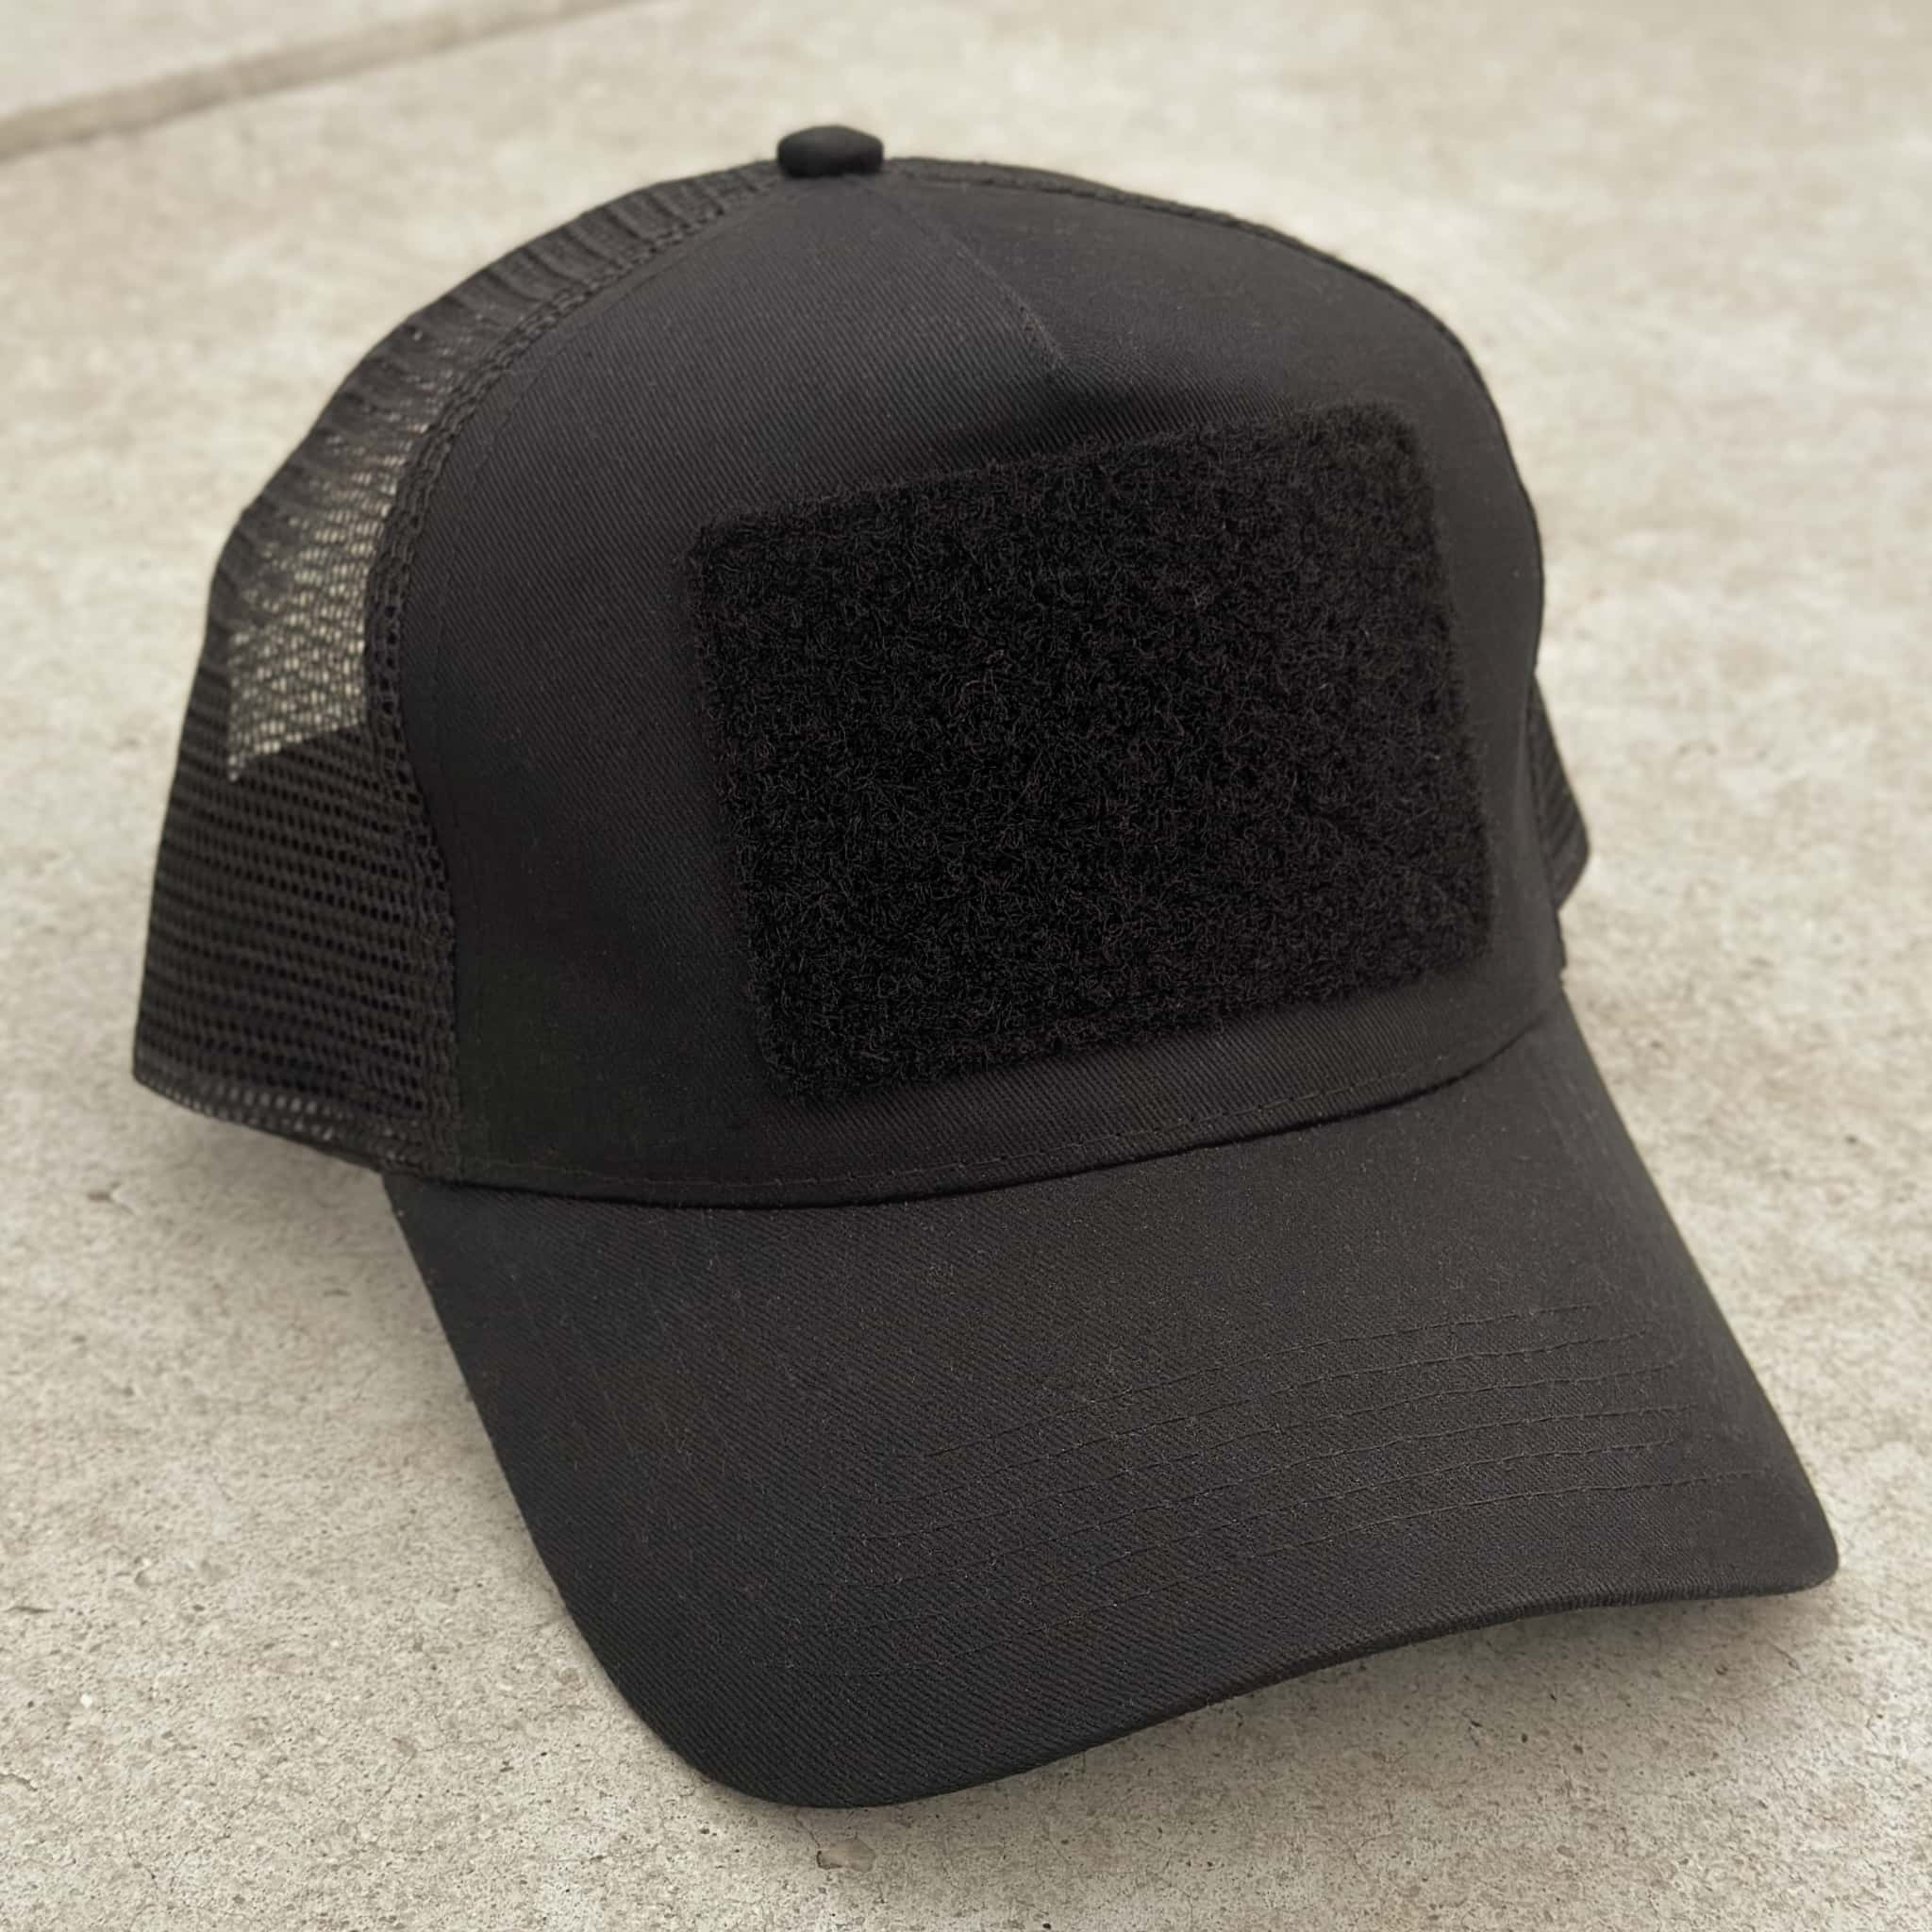 The Blank Canvas Snapback Cap in black color with large hook-and-loop area on the front